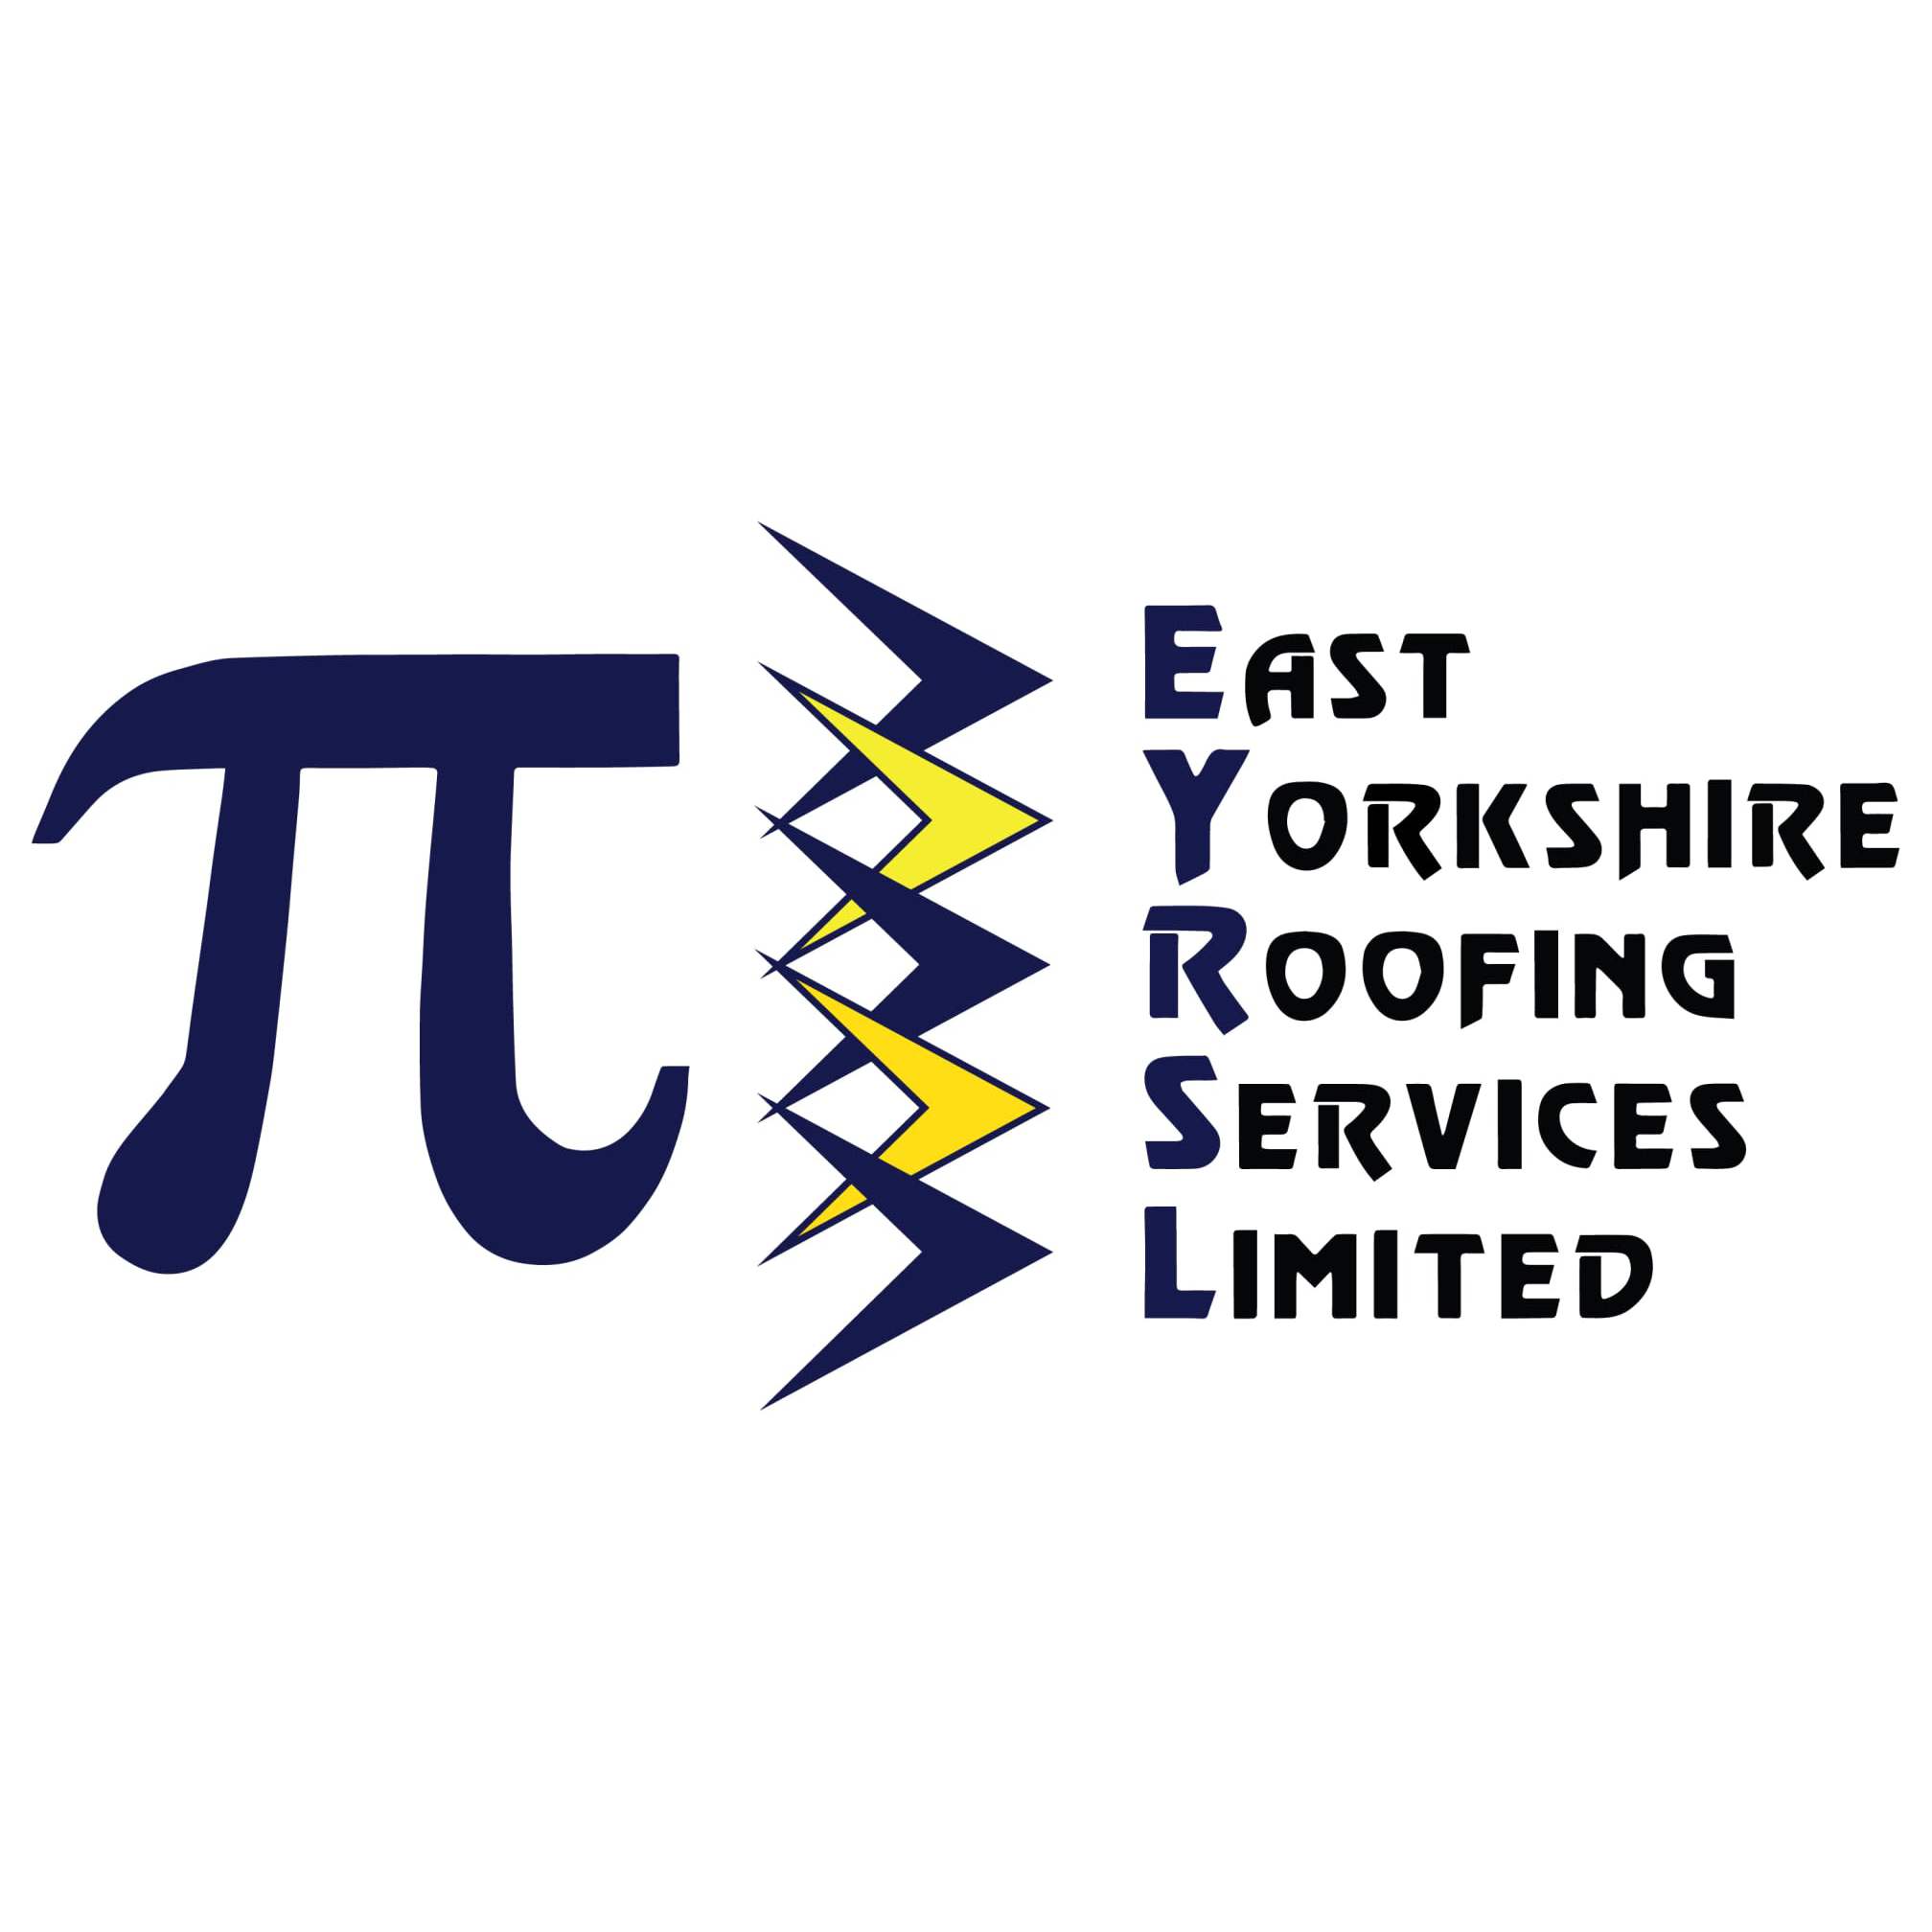 East Yorkshire Roofing Services Ltd - Beverley, East Riding of Yorkshire HU17 0RN - 01482 345346 | ShowMeLocal.com